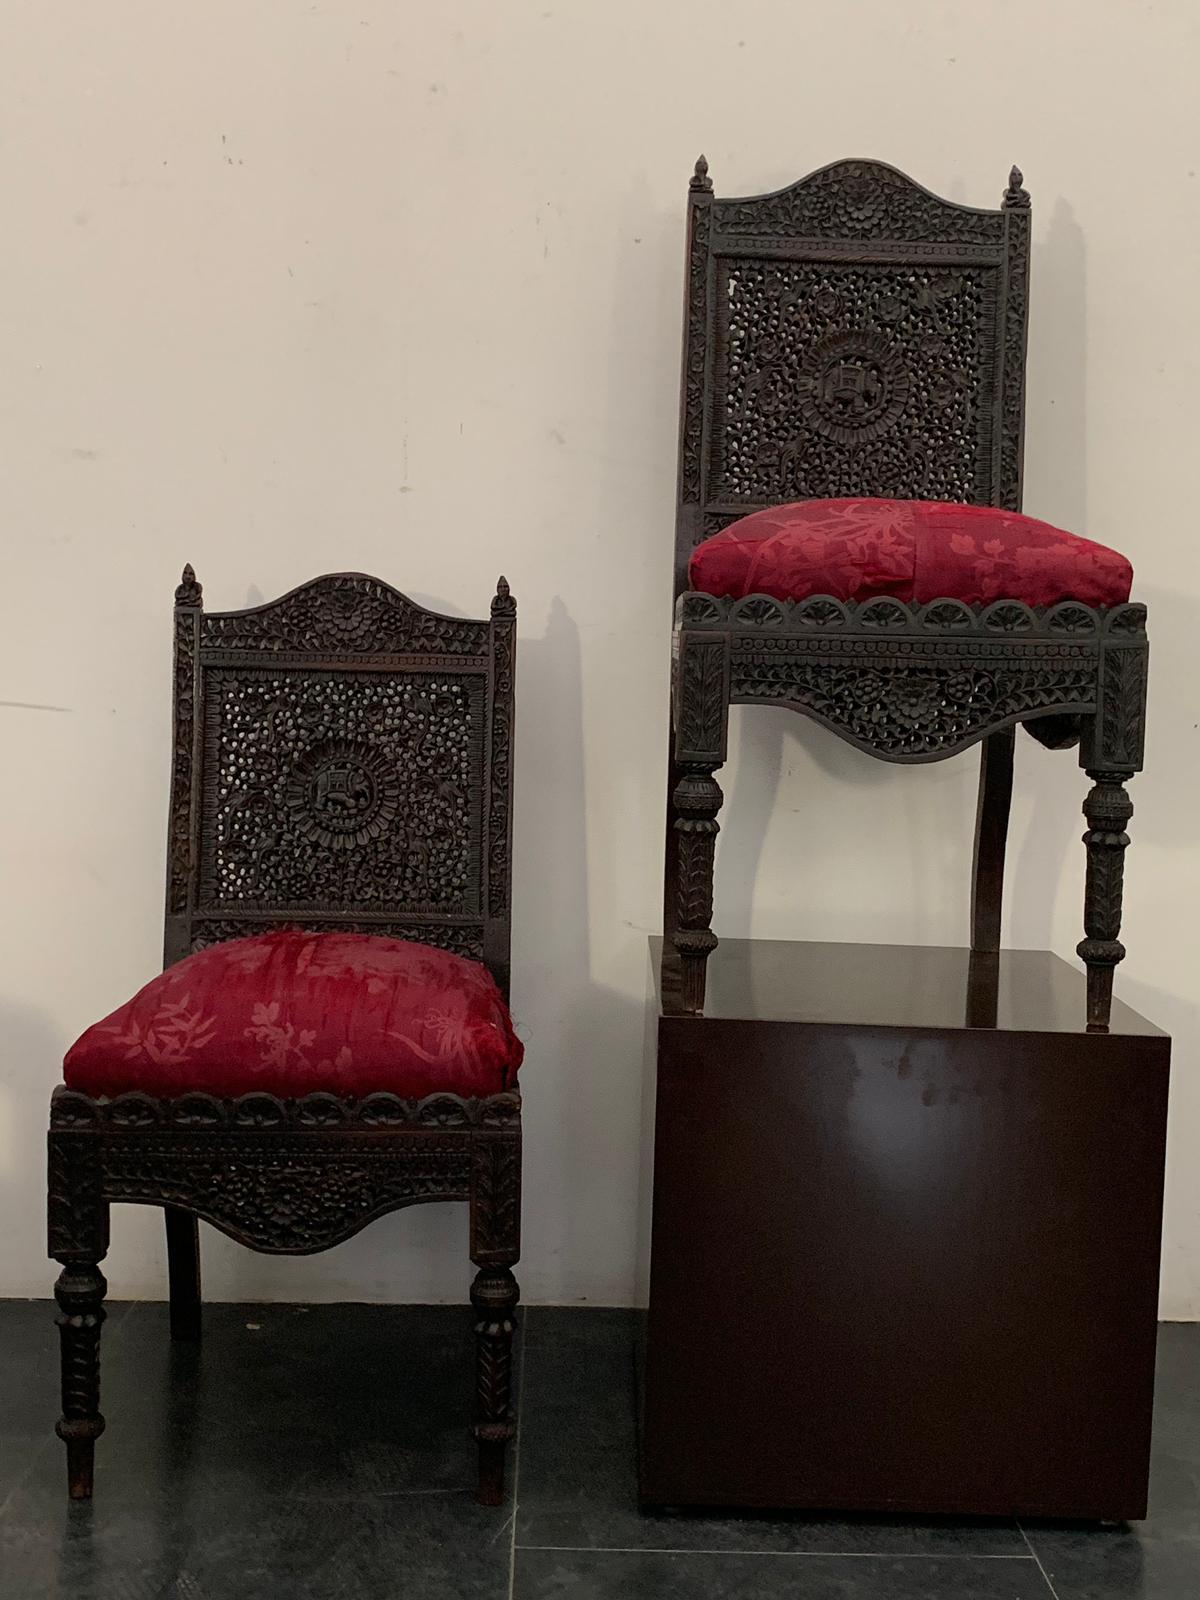 Pair of Indian Anglo chairs, carved on teak wood, on the central rose window of the backrest is depicted an imperial elephant, on the backrest at the sides the knobs the carvings depict 2 monks in meditation.
Packaging with bubble wrap and